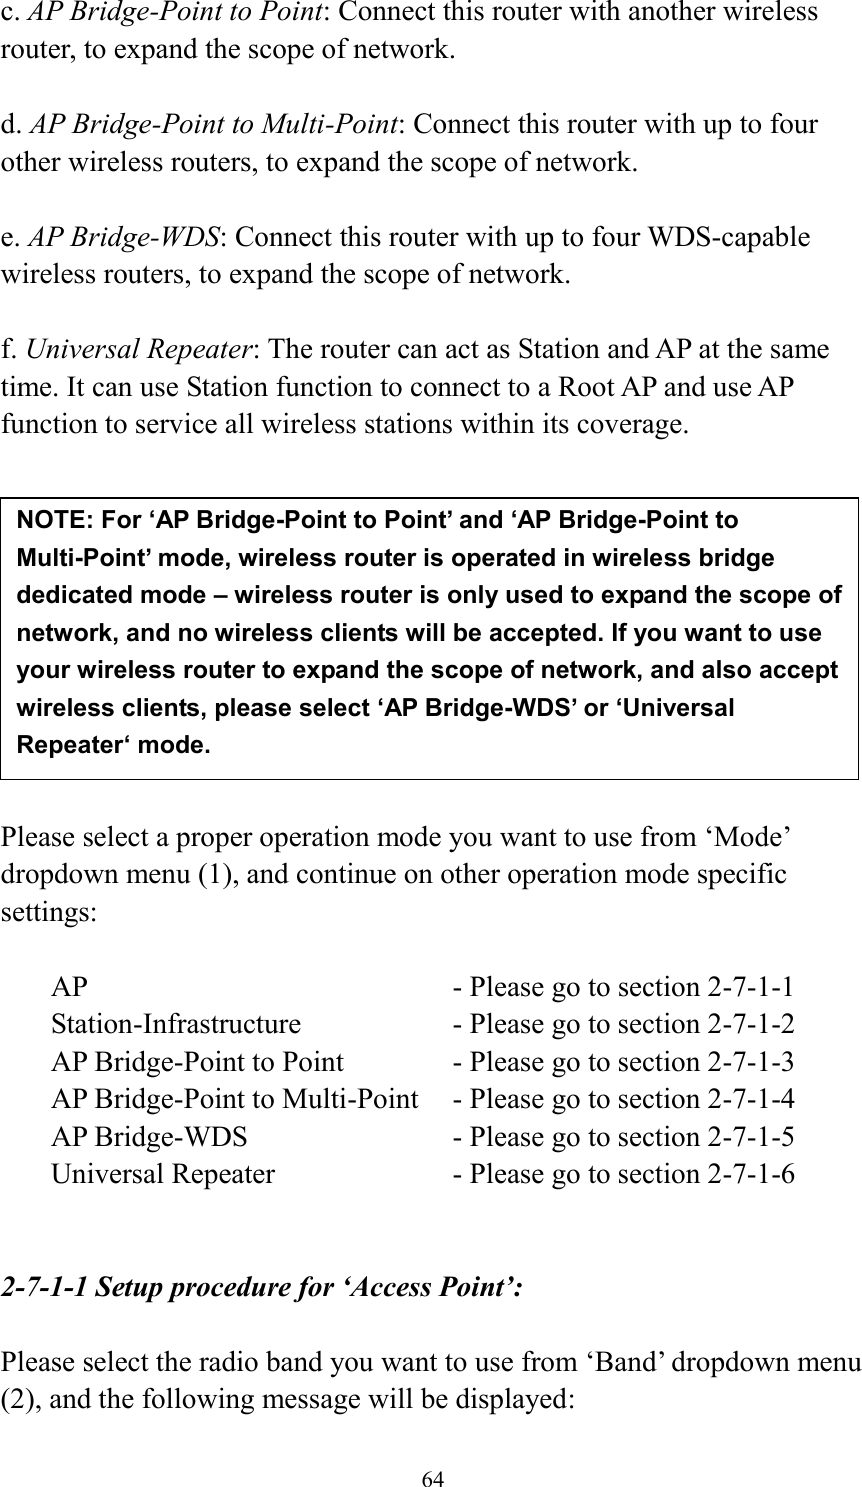 64 c. AP Bridge-Point to Point: Connect this router with another wireless router, to expand the scope of network.    d. AP Bridge-Point to Multi-Point: Connect this router with up to four other wireless routers, to expand the scope of network.  e. AP Bridge-WDS: Connect this router with up to four WDS-capable wireless routers, to expand the scope of network.  f. Universal Repeater: The router can act as Station and AP at the same time. It can use Station function to connect to a Root AP and use AP function to service all wireless stations within its coverage.           Please select a proper operation mode you want to use from ‘Mode’ dropdown menu (1), and continue on other operation mode specific settings:  AP                - Please go to section 2-7-1-1 Station-Infrastructure        - Please go to section 2-7-1-2 AP Bridge-Point to Point     - Please go to section 2-7-1-3 AP Bridge-Point to Multi-Point  - Please go to section 2-7-1-4 AP Bridge-WDS         - Please go to section 2-7-1-5 Universal Repeater          - Please go to section 2-7-1-6   2-7-1-1 Setup procedure for ‘Access Point’:  Please select the radio band you want to use from ‘Band’ dropdown menu (2), and the following message will be displayed: NOTE: For ‘AP Bridge-Point to Point’ and ‘AP Bridge-Point to Multi-Point’ mode, wireless router is operated in wireless bridge dedicated mode – wireless router is only used to expand the scope of network, and no wireless clients will be accepted. If you want to use your wireless router to expand the scope of network, and also accept wireless clients, please select ‘AP Bridge-WDS’ or ‘Universal Repeater‘ mode. 